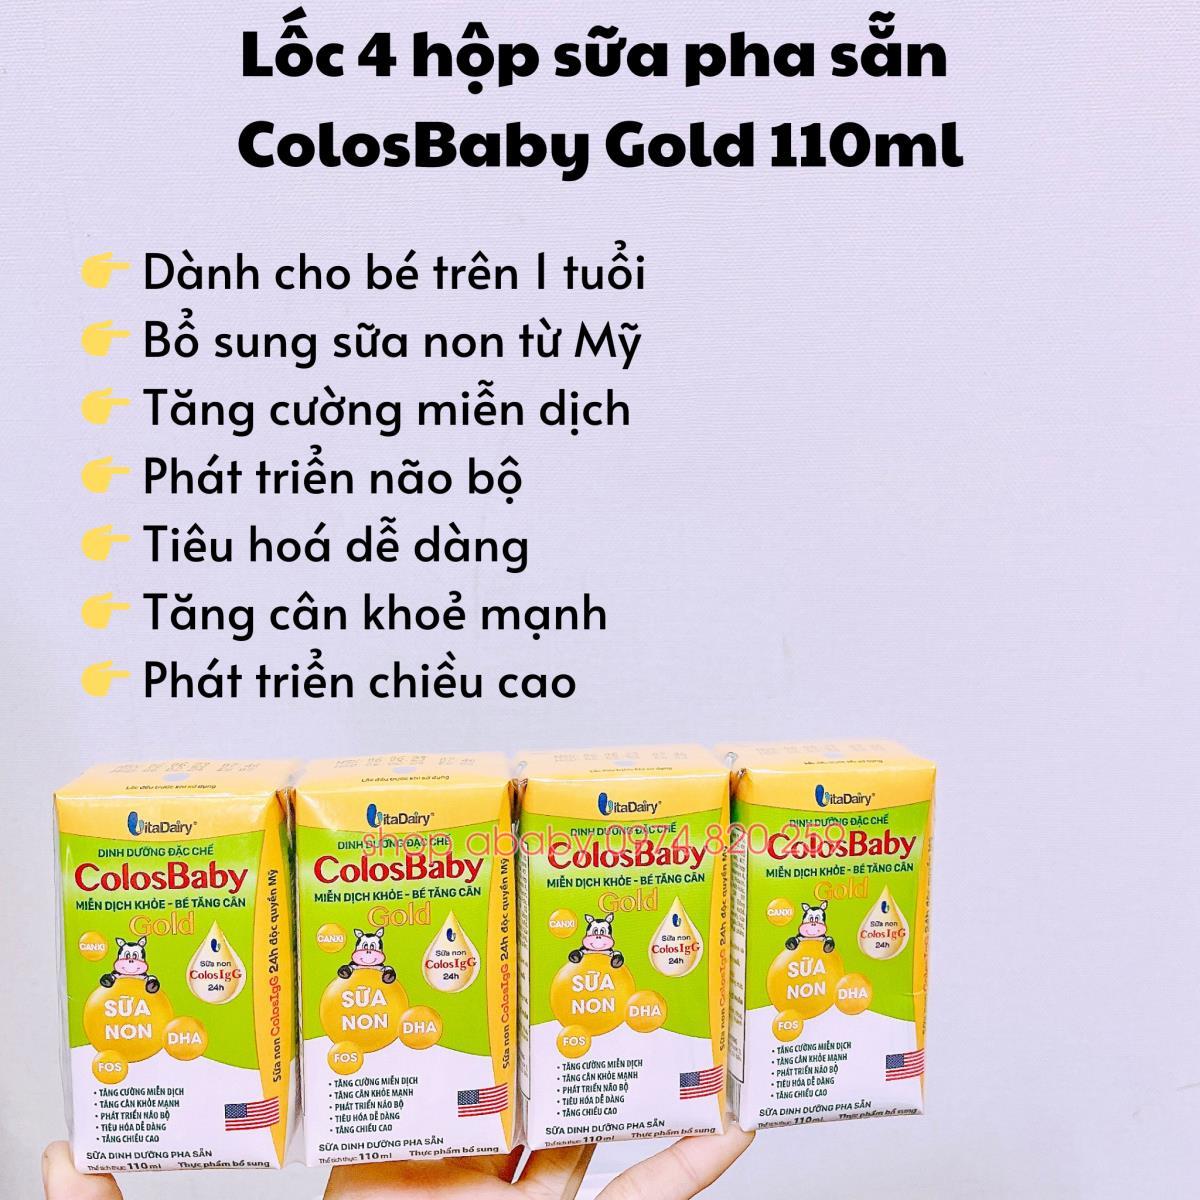 Lốc 4 hộp sữa pha sẵn ColosBaby Gold (1y+)